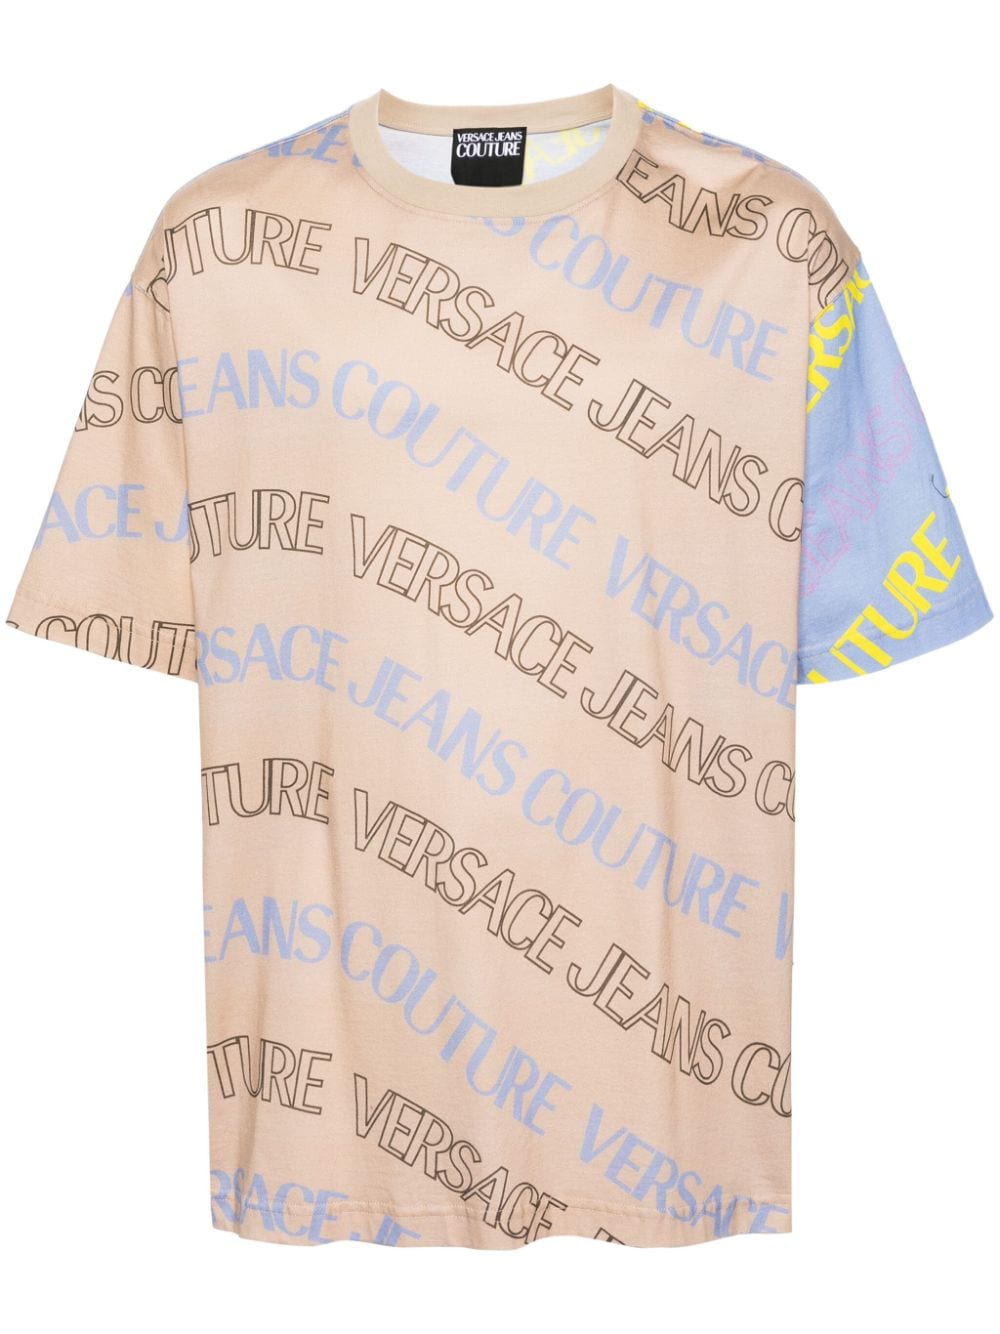 Versace Jeans Couture T-Shirt in Colour-Block-Optik - Nude von Versace Jeans Couture